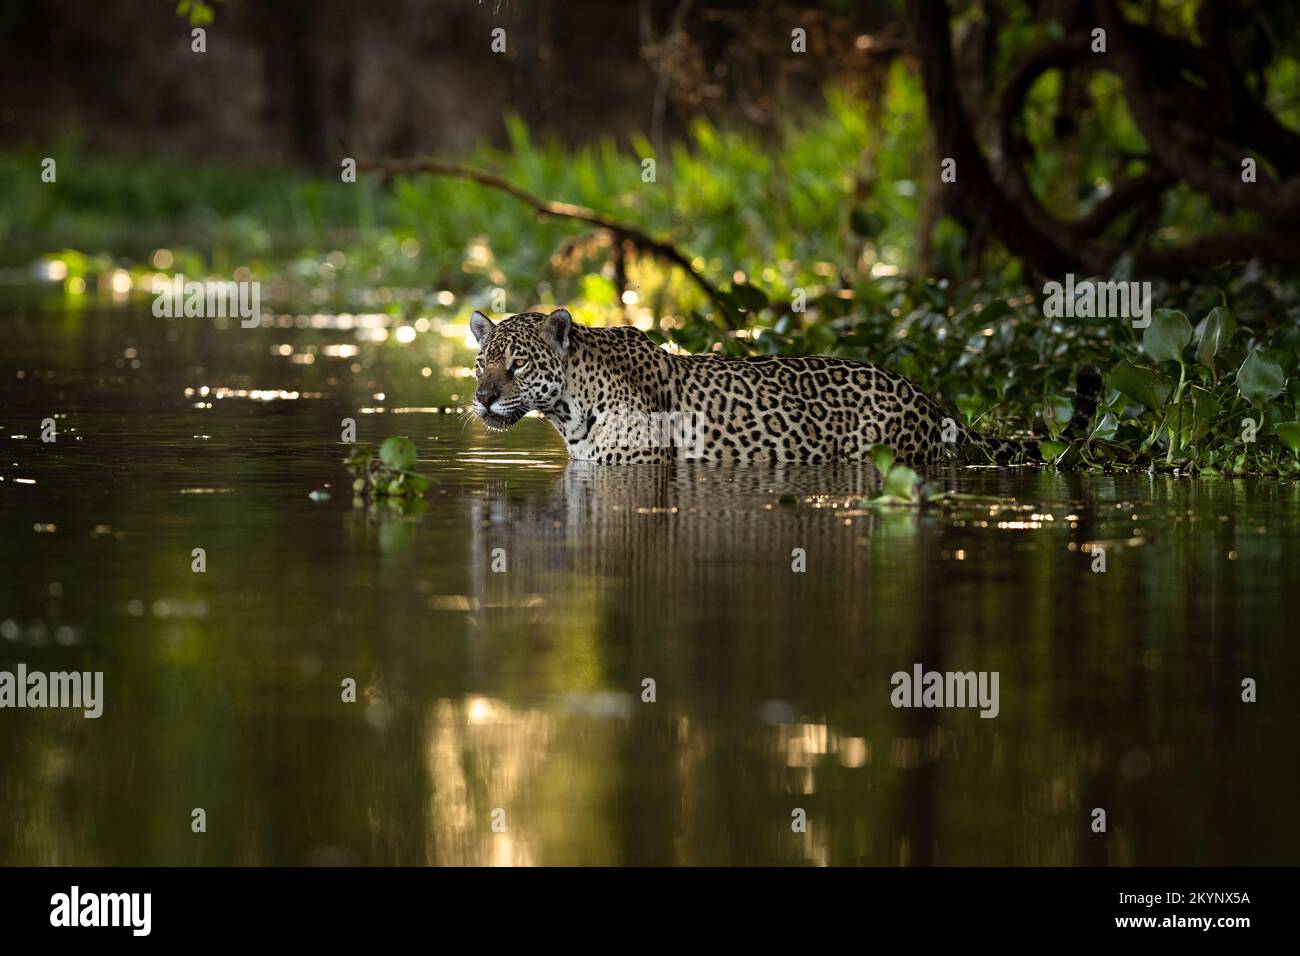 A Jaguar entering the water in the Pantanal of Brazil. Stock Photo